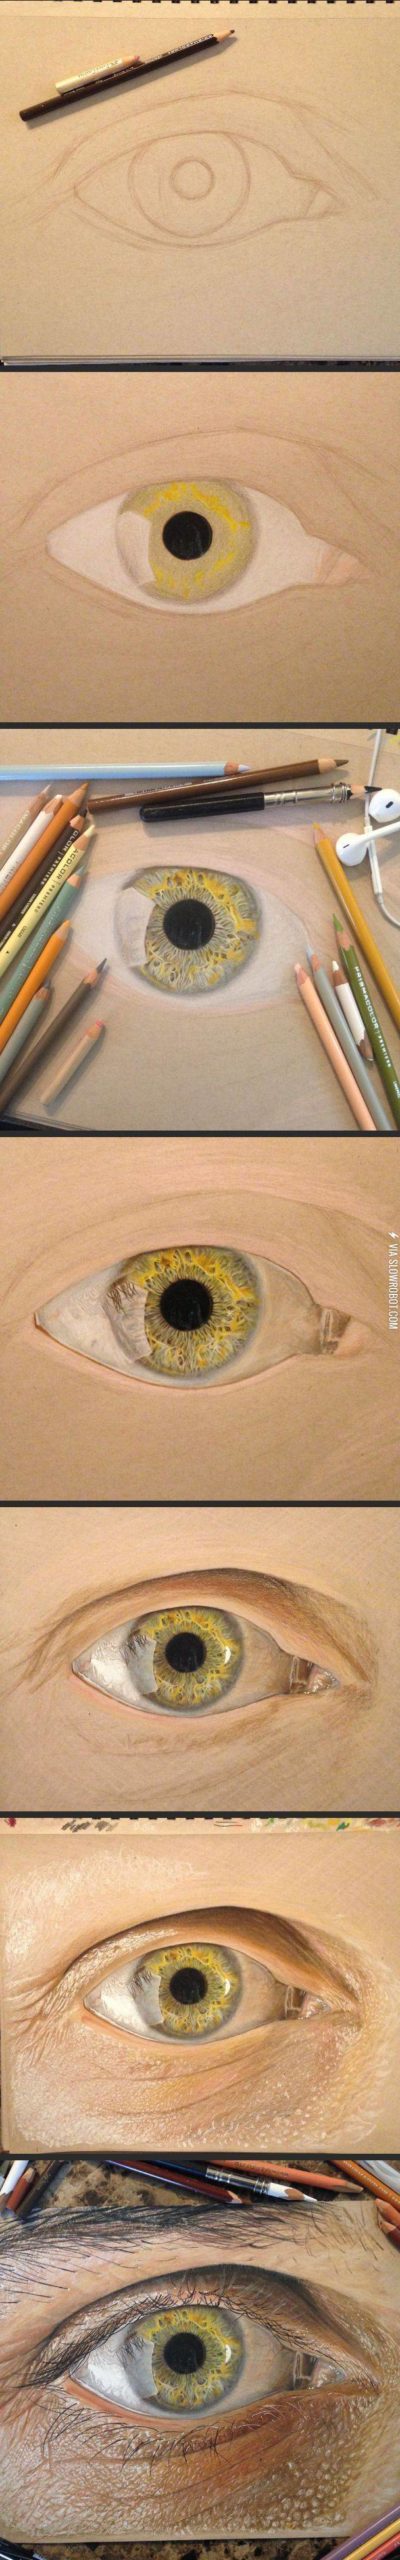 How+to+draw+an+eye.